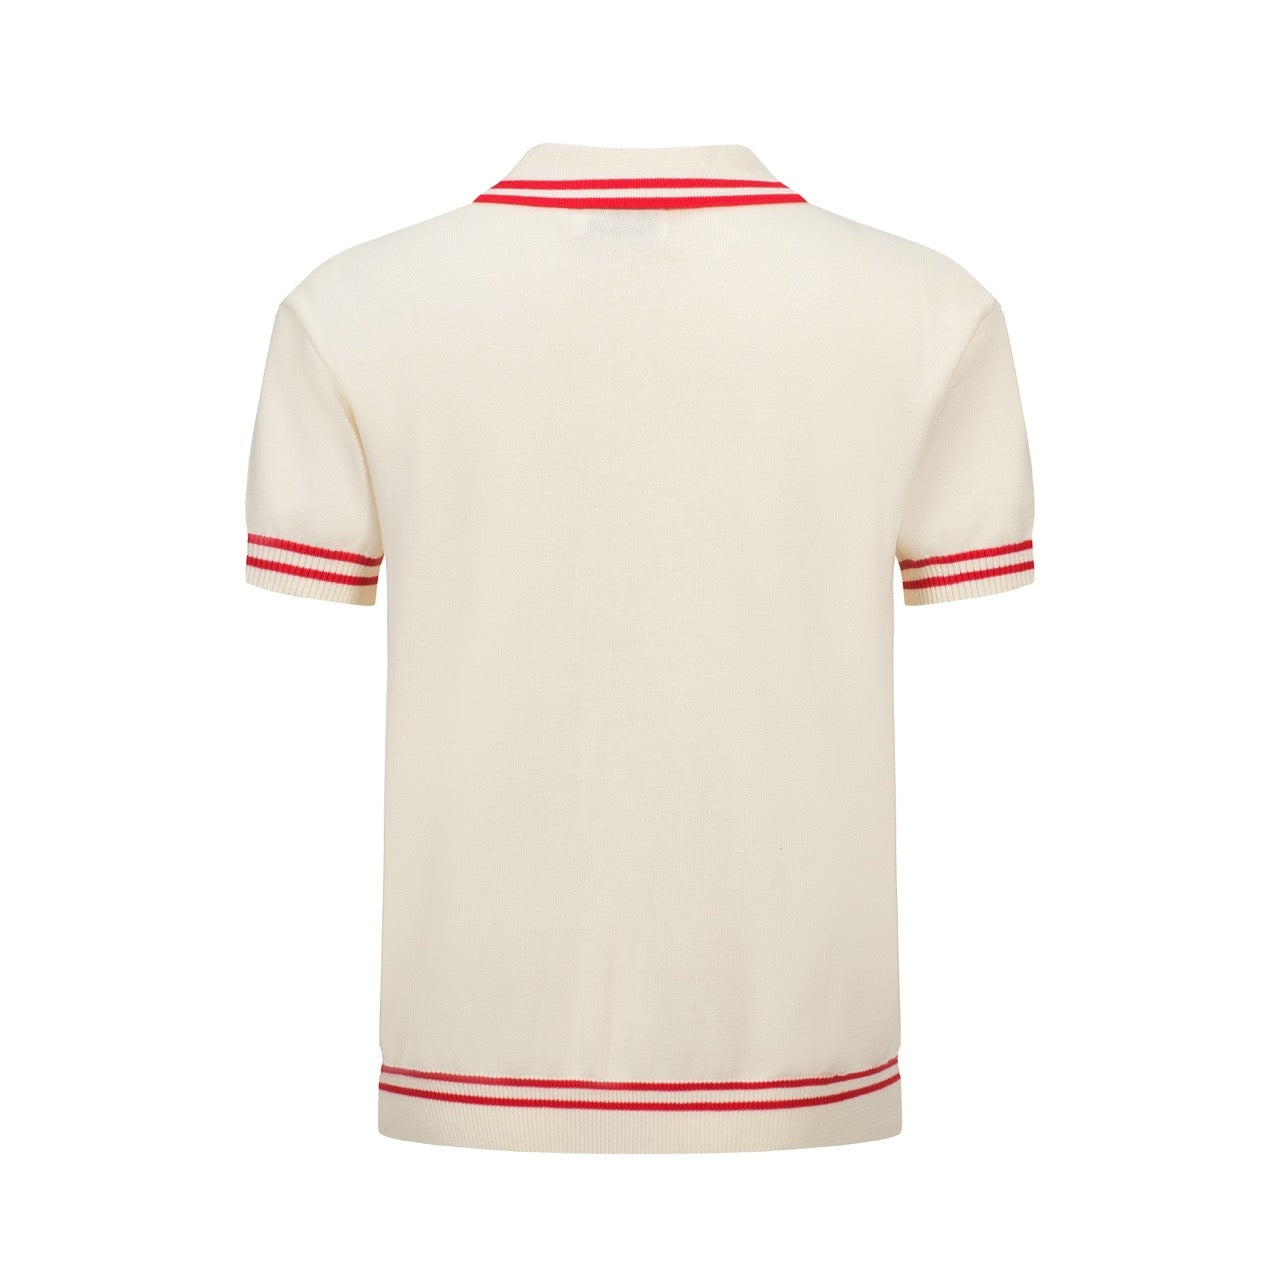 Men's White Jacquard Panel Knit Polo With Red Line Neck